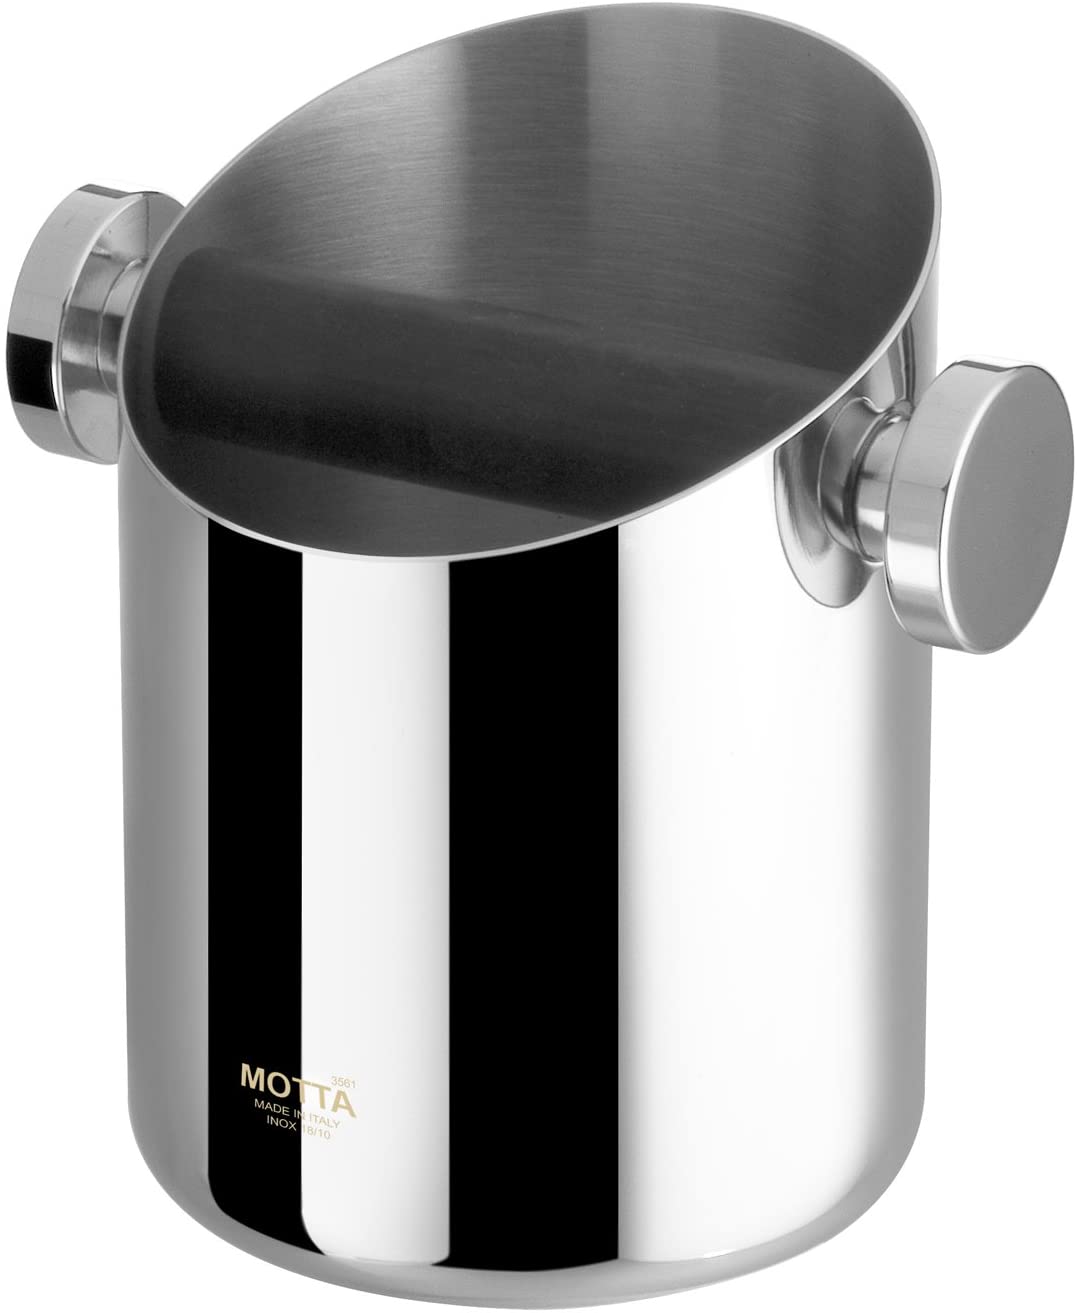 Motta Launch 10.5 cm Polished Stainless Steel